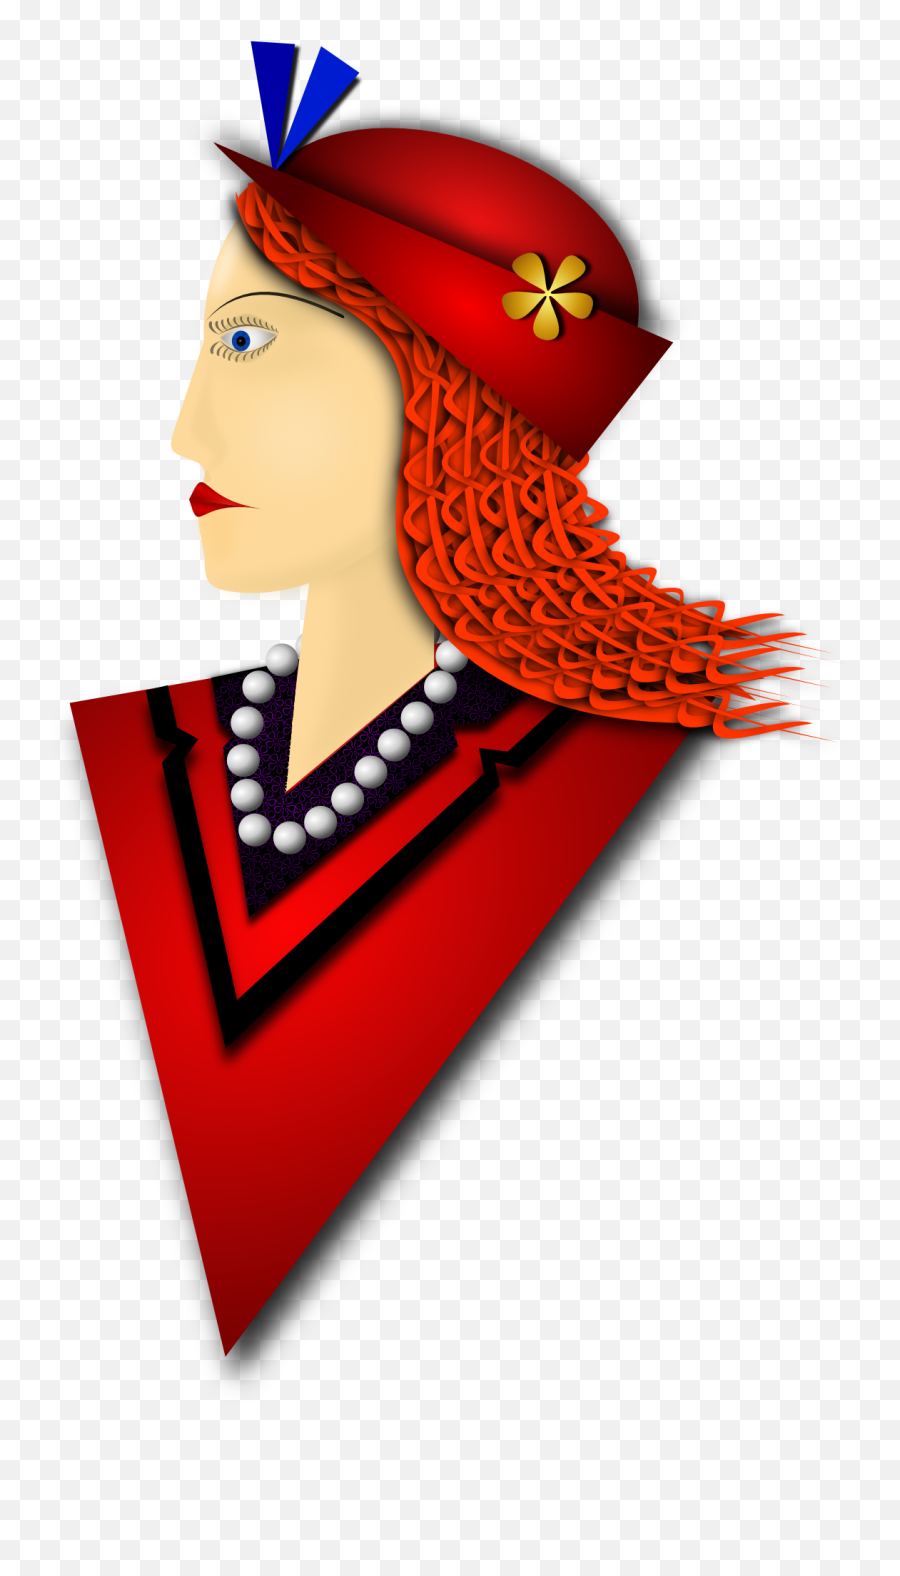 Lady With The Red Beret Clipart Free Image Download Emoji,Beret Png